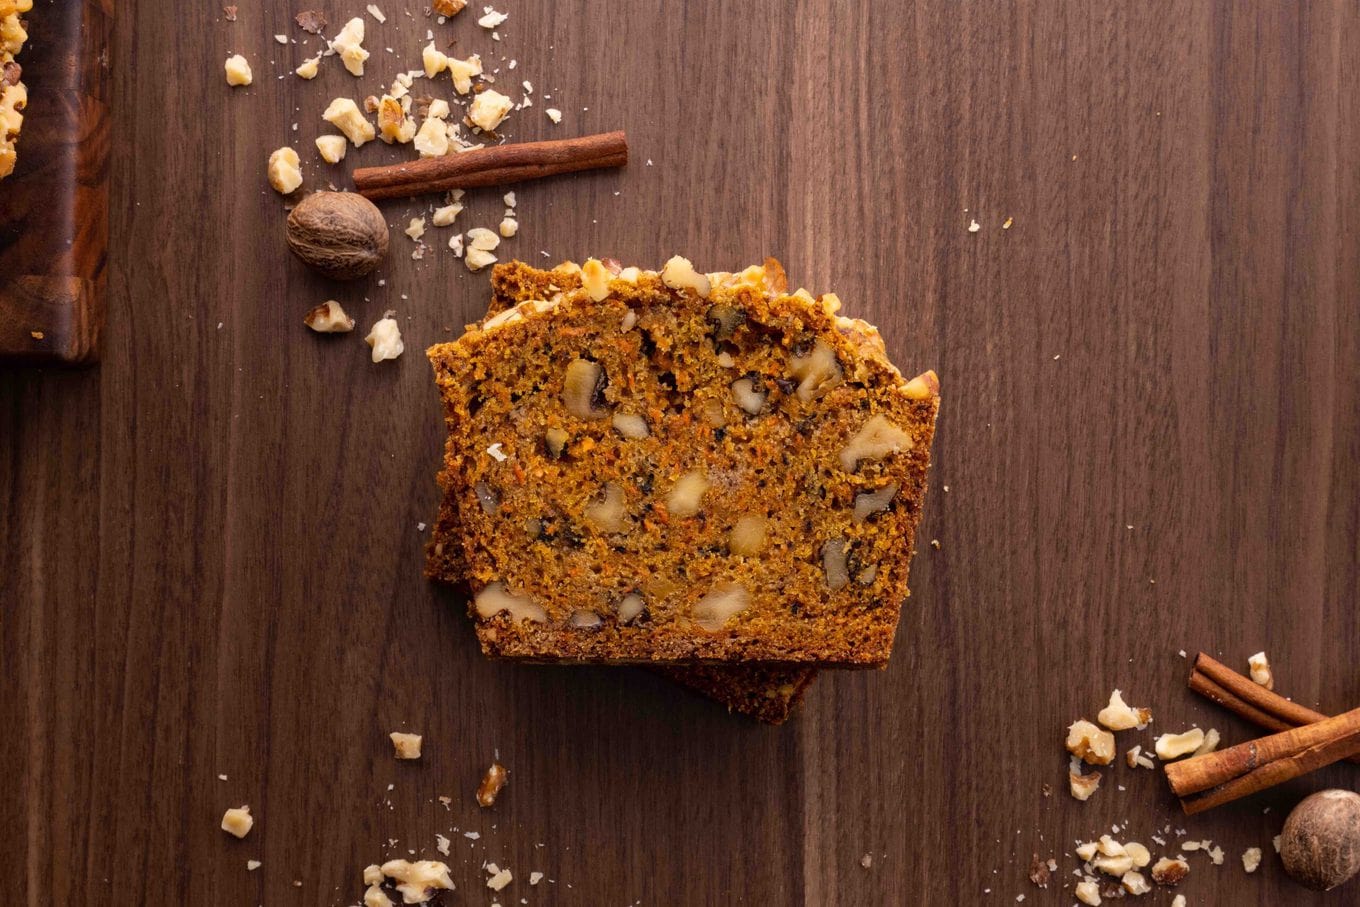 Carrot Bread slice on board with nuts